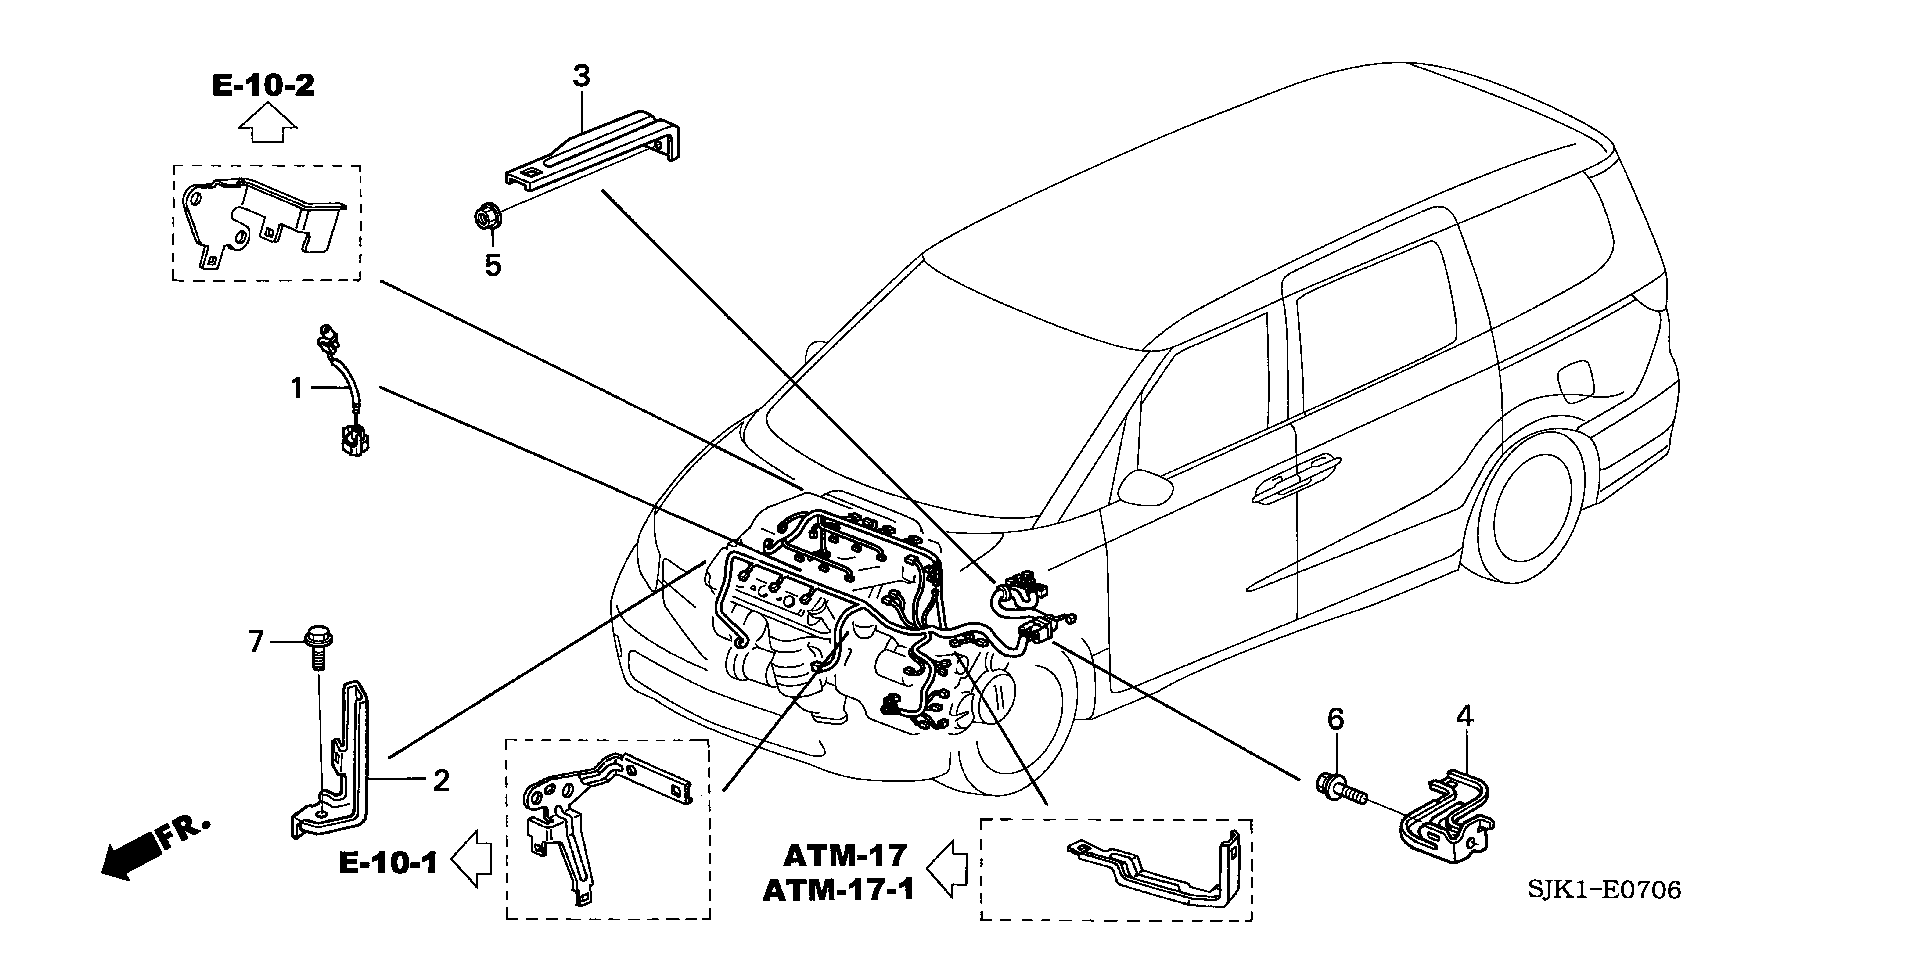 ENGINE WIRE HARNESS STAY(V6)